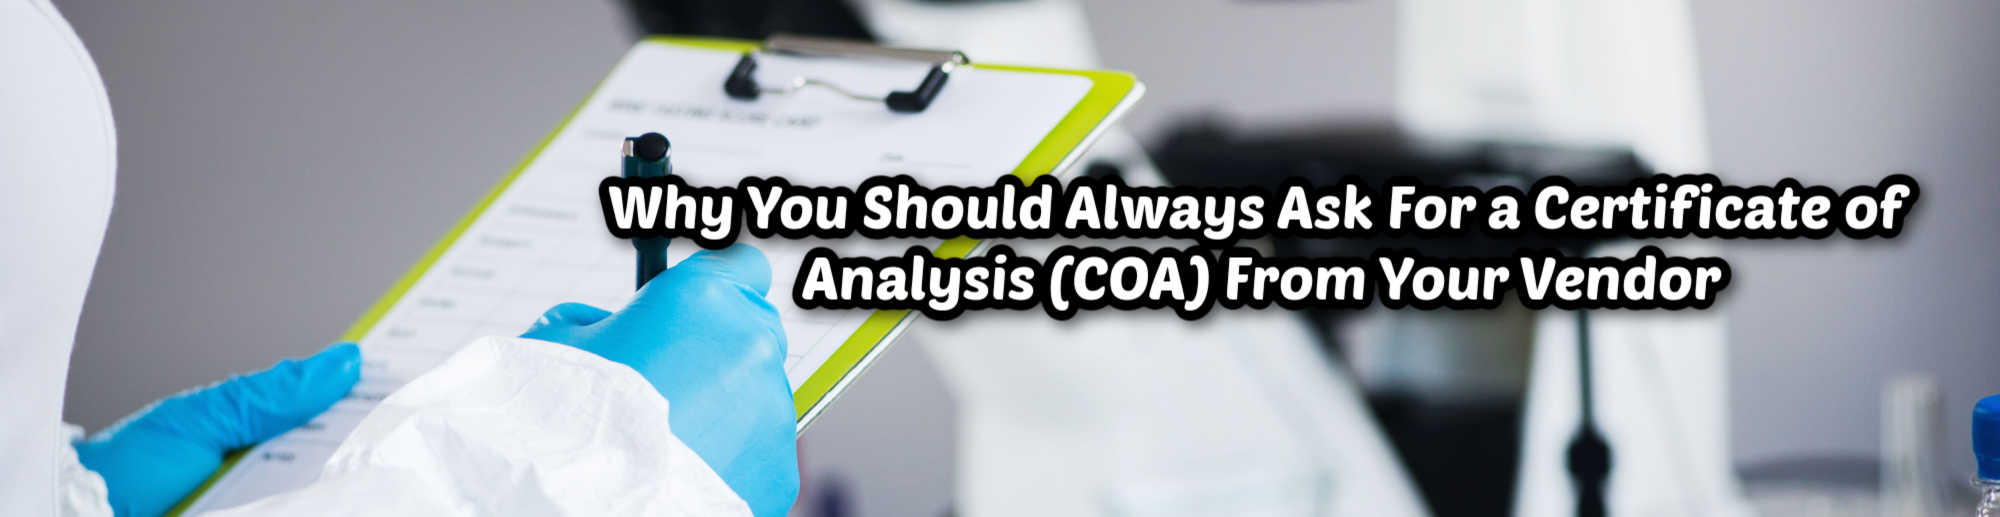 why you should ask for a certificate of analysis to your vendor